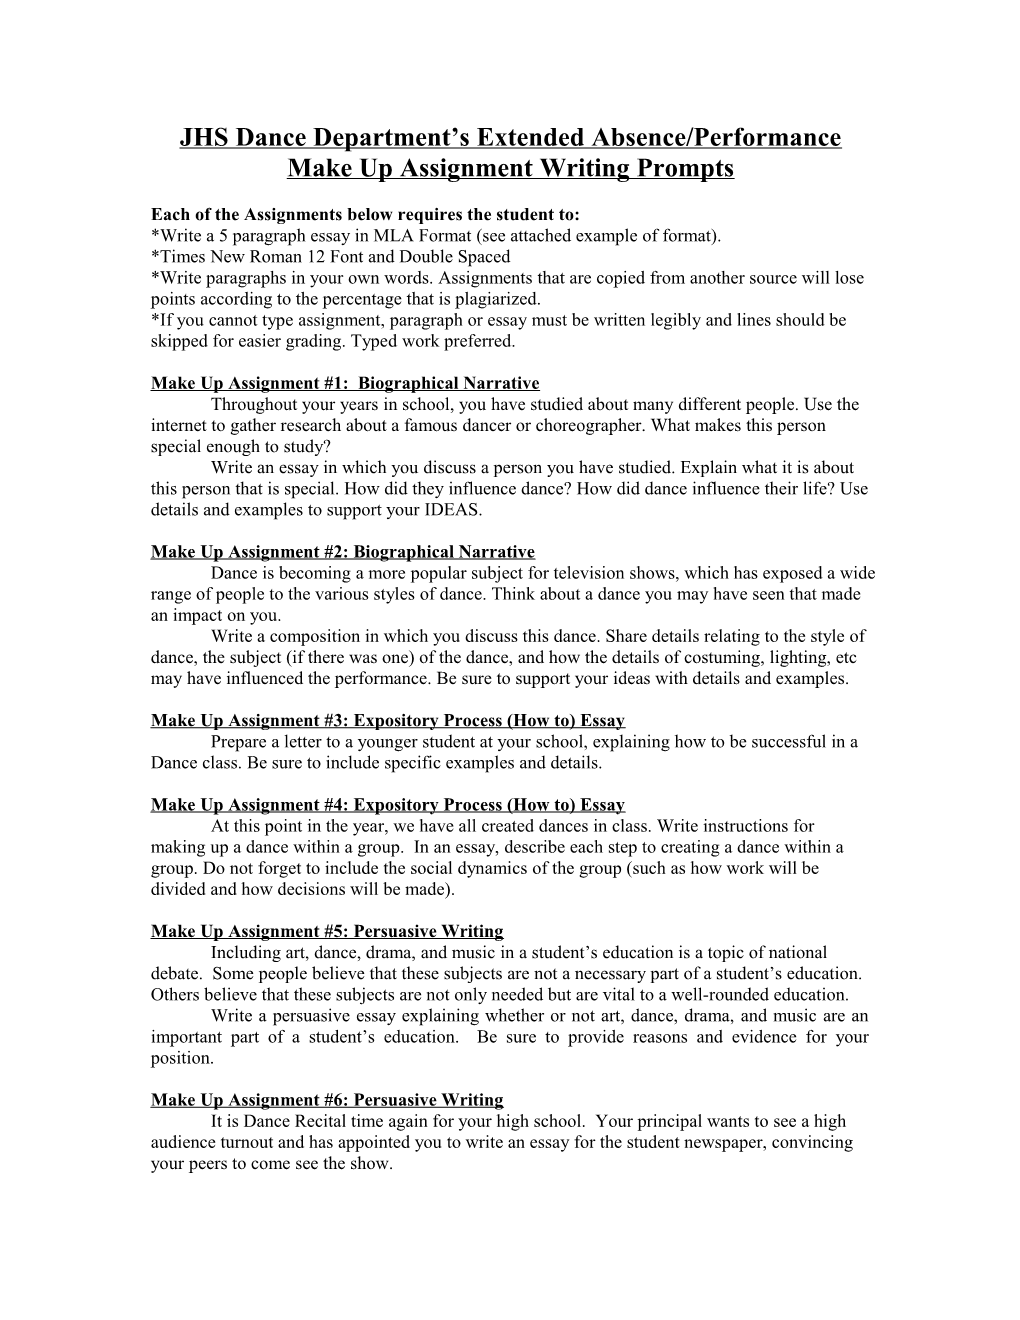 Each of the Assignments Below Requires the Student to Write a 5 Paragraph Essay in MLA